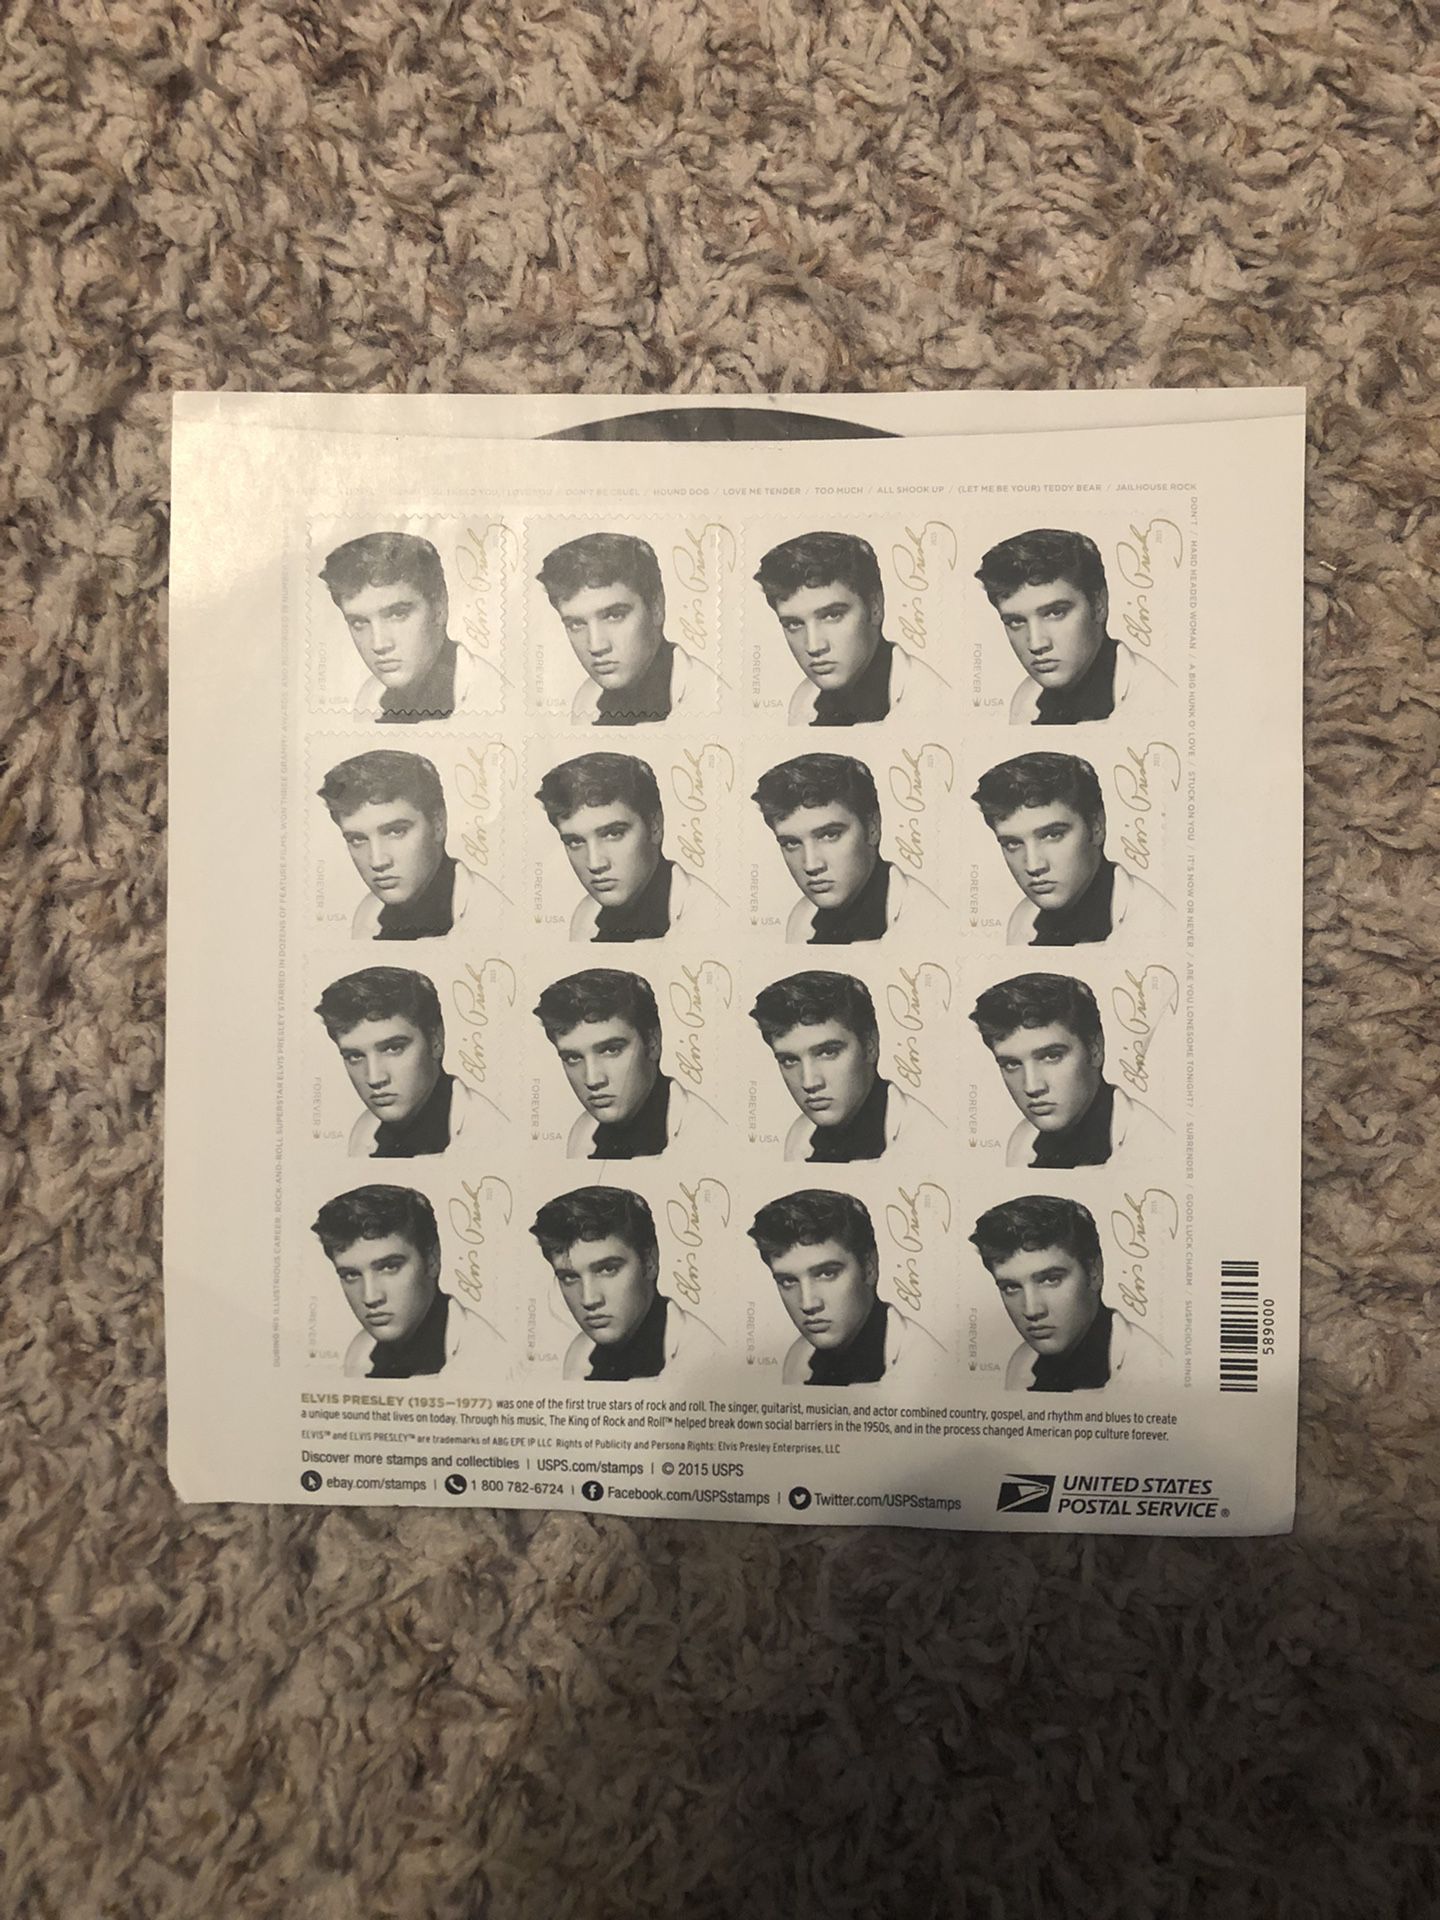 Stamp Collection  —Elvis  From Post Office  I Purchased  In 2017 I Believe  No Longer Interested In Collection  